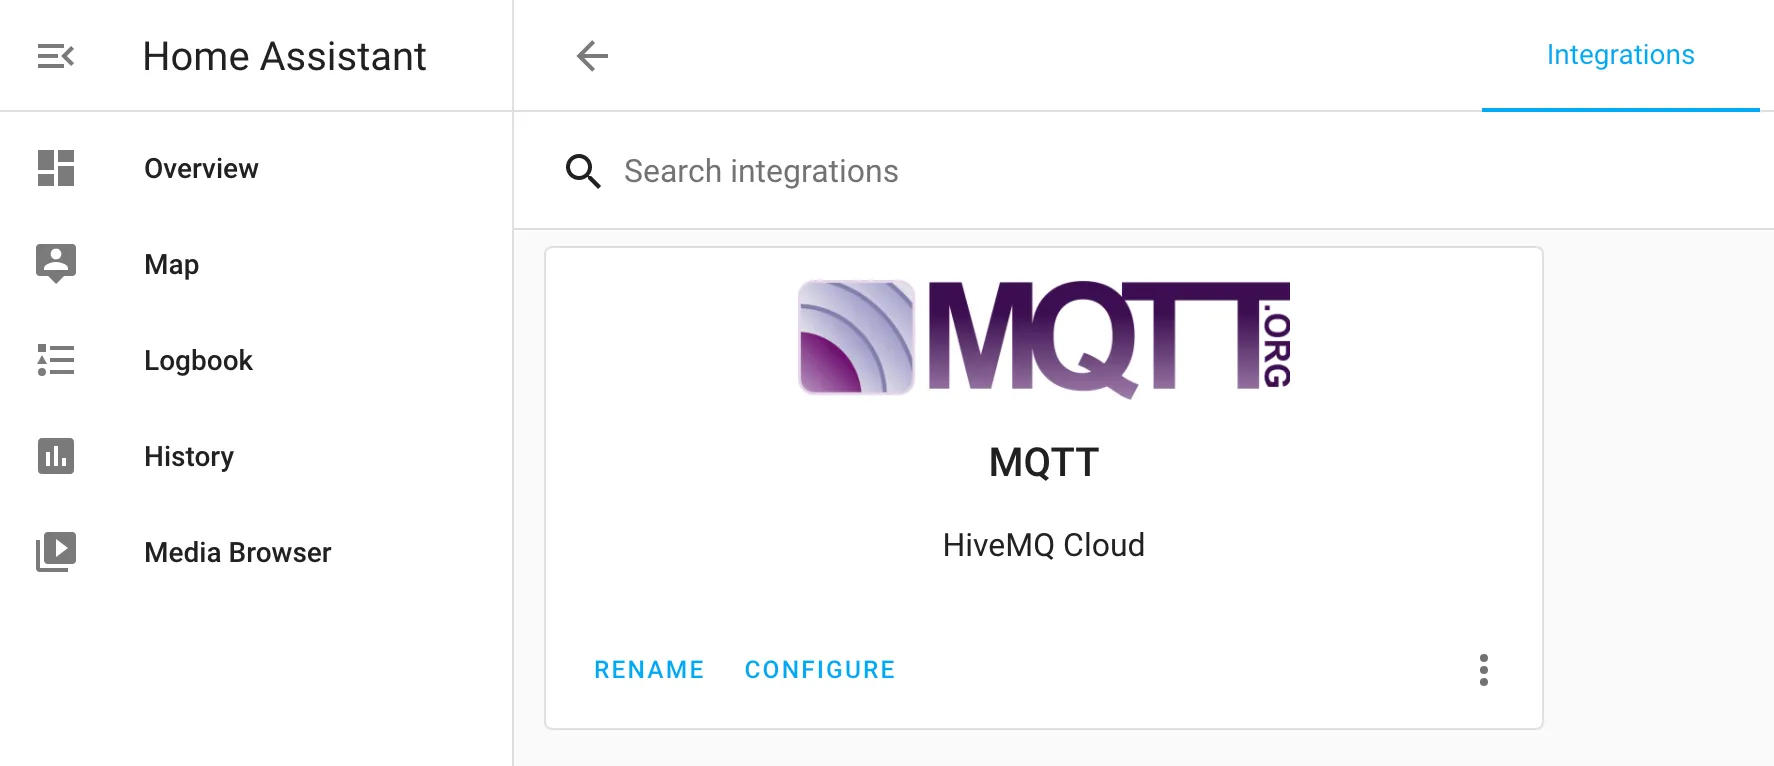 MQTT integration in Home Assistant